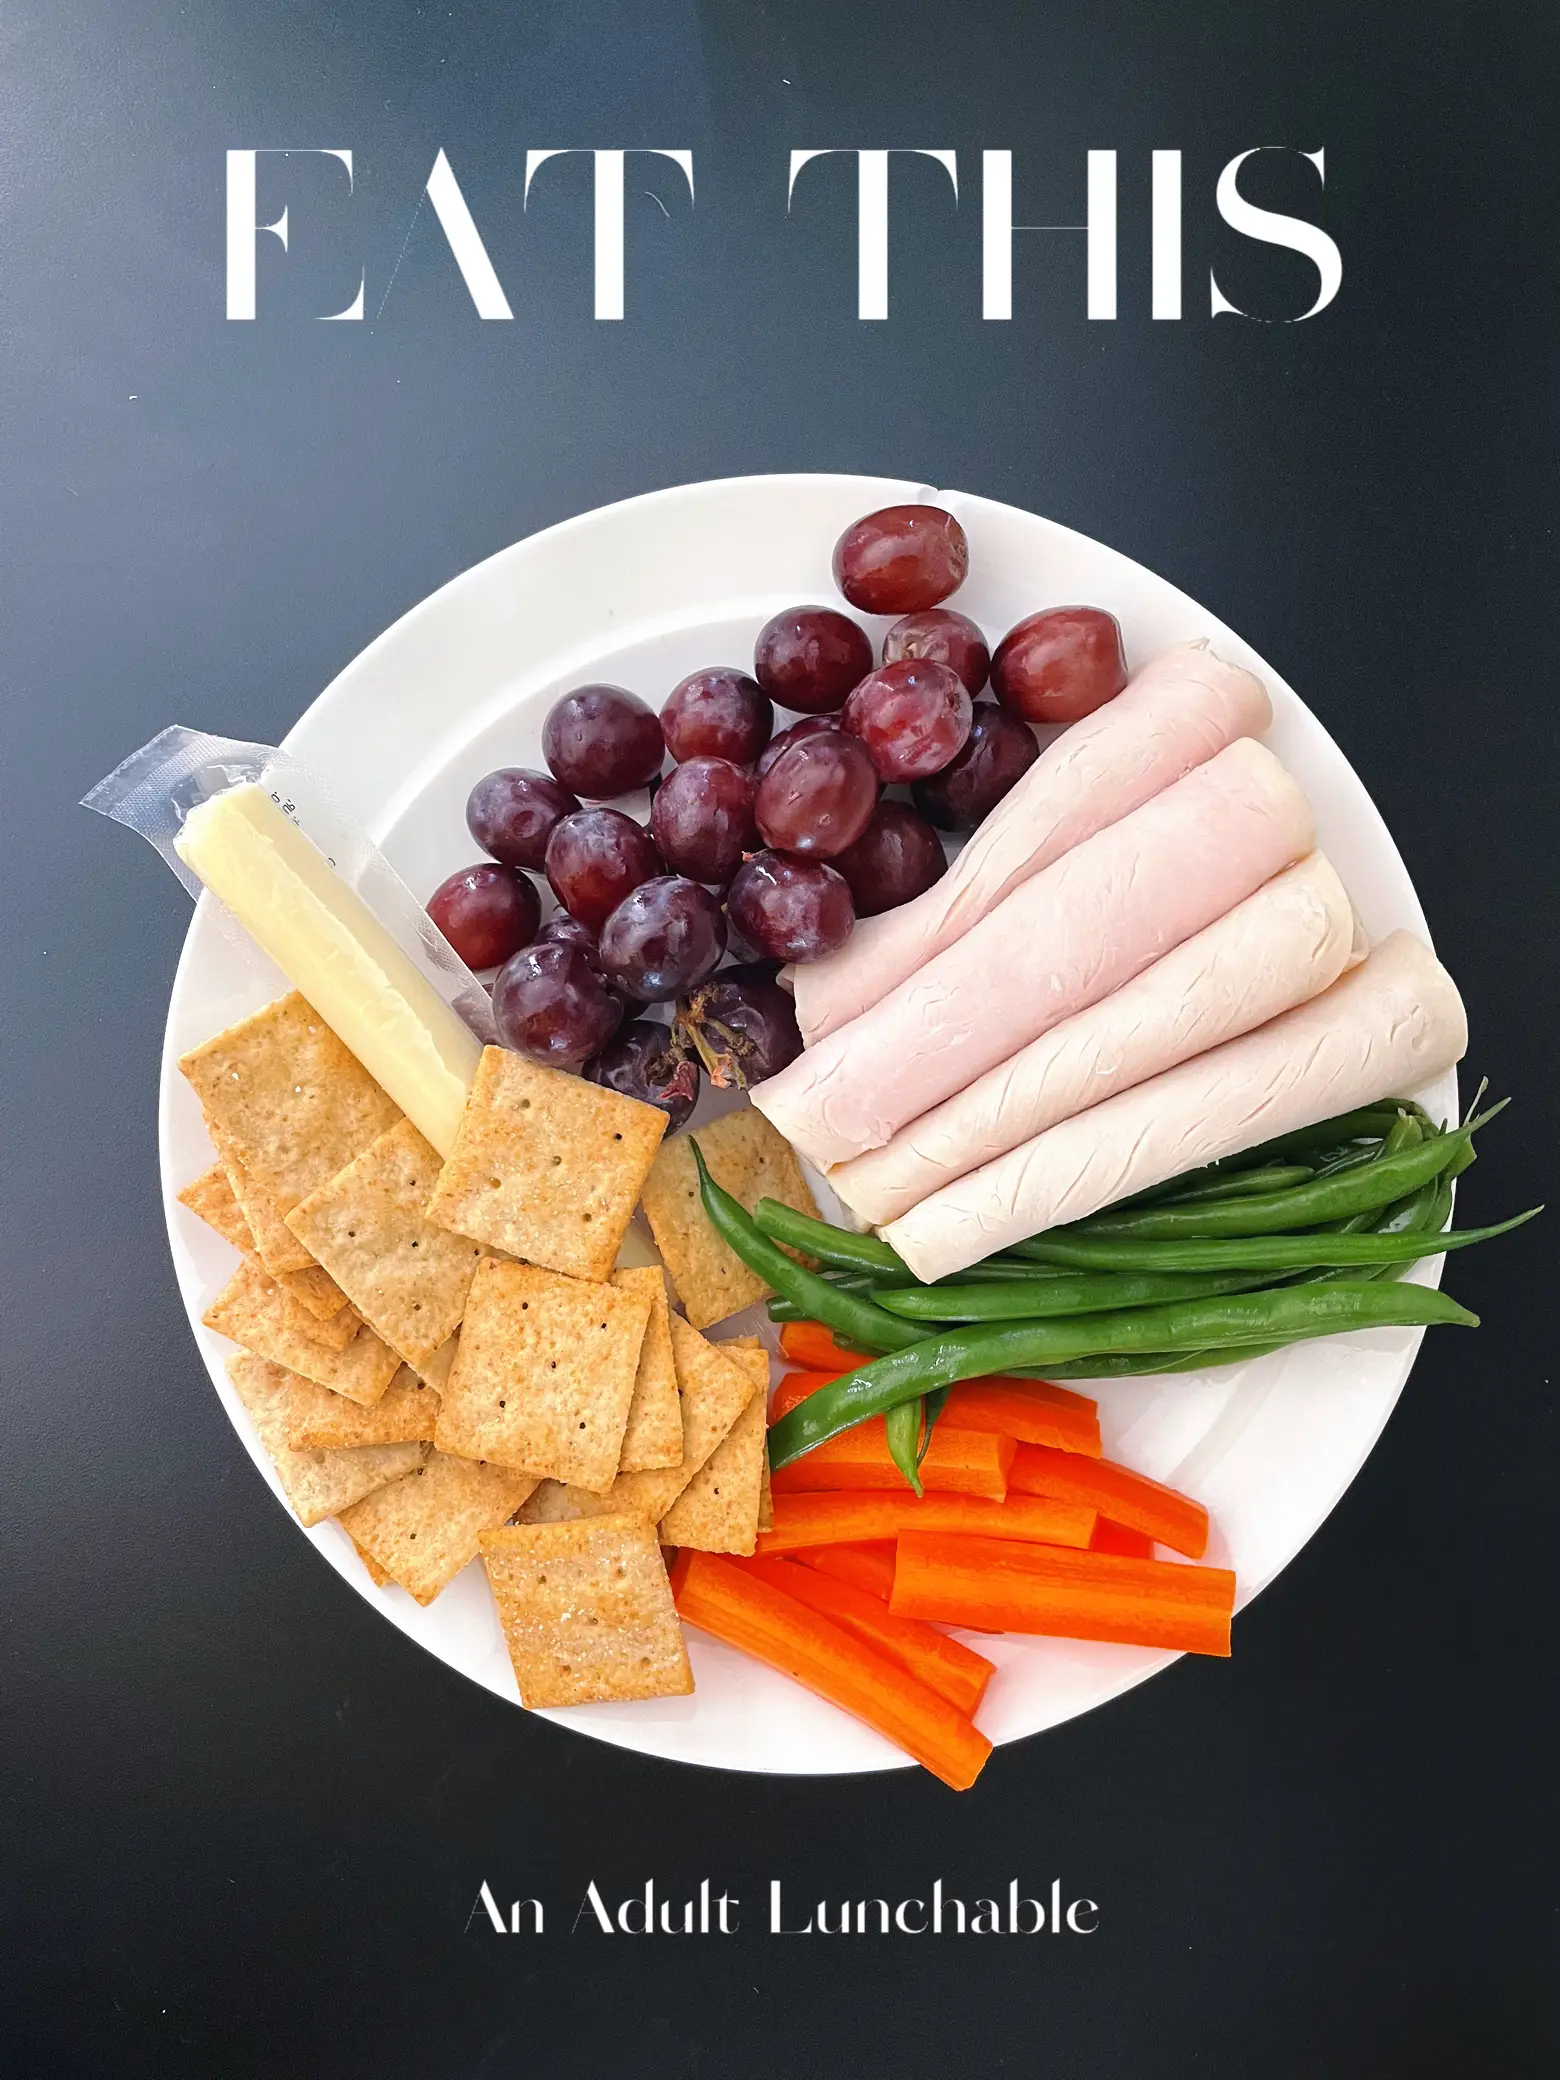 The Best 10 Adult Lunchables (Easy + Healthy!) - The Balanced Nutritionist